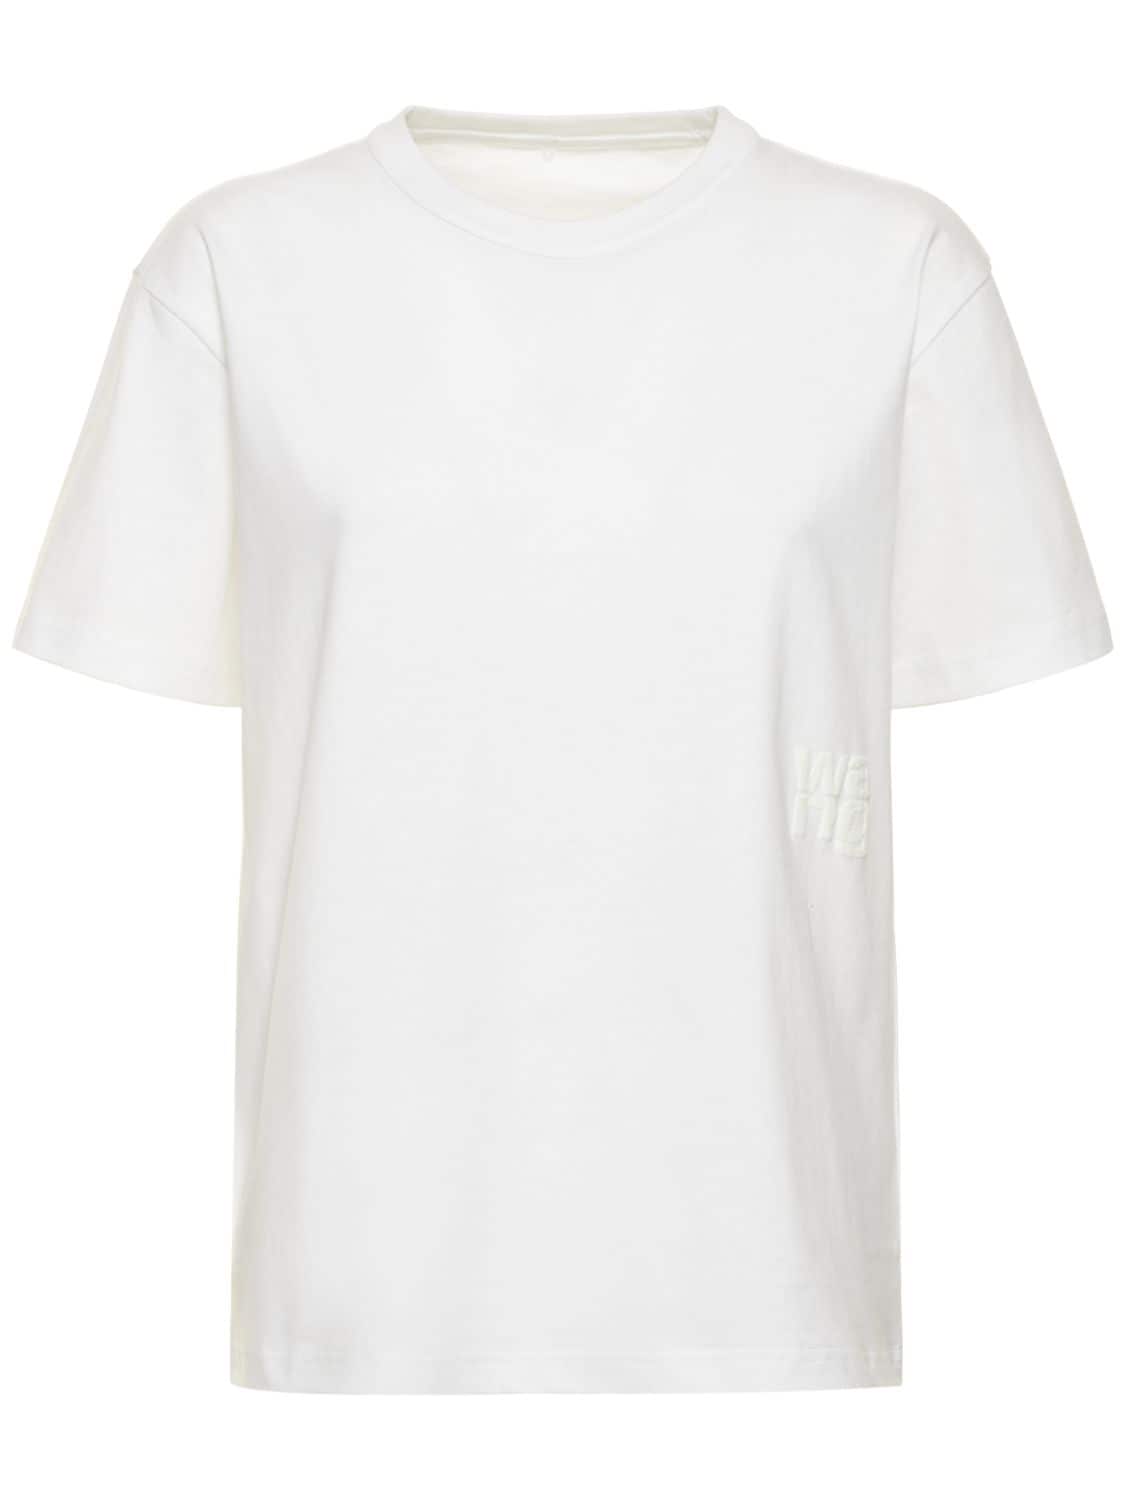 Alexander Wang Essential Short Sleeve Cotton T-shirt In White